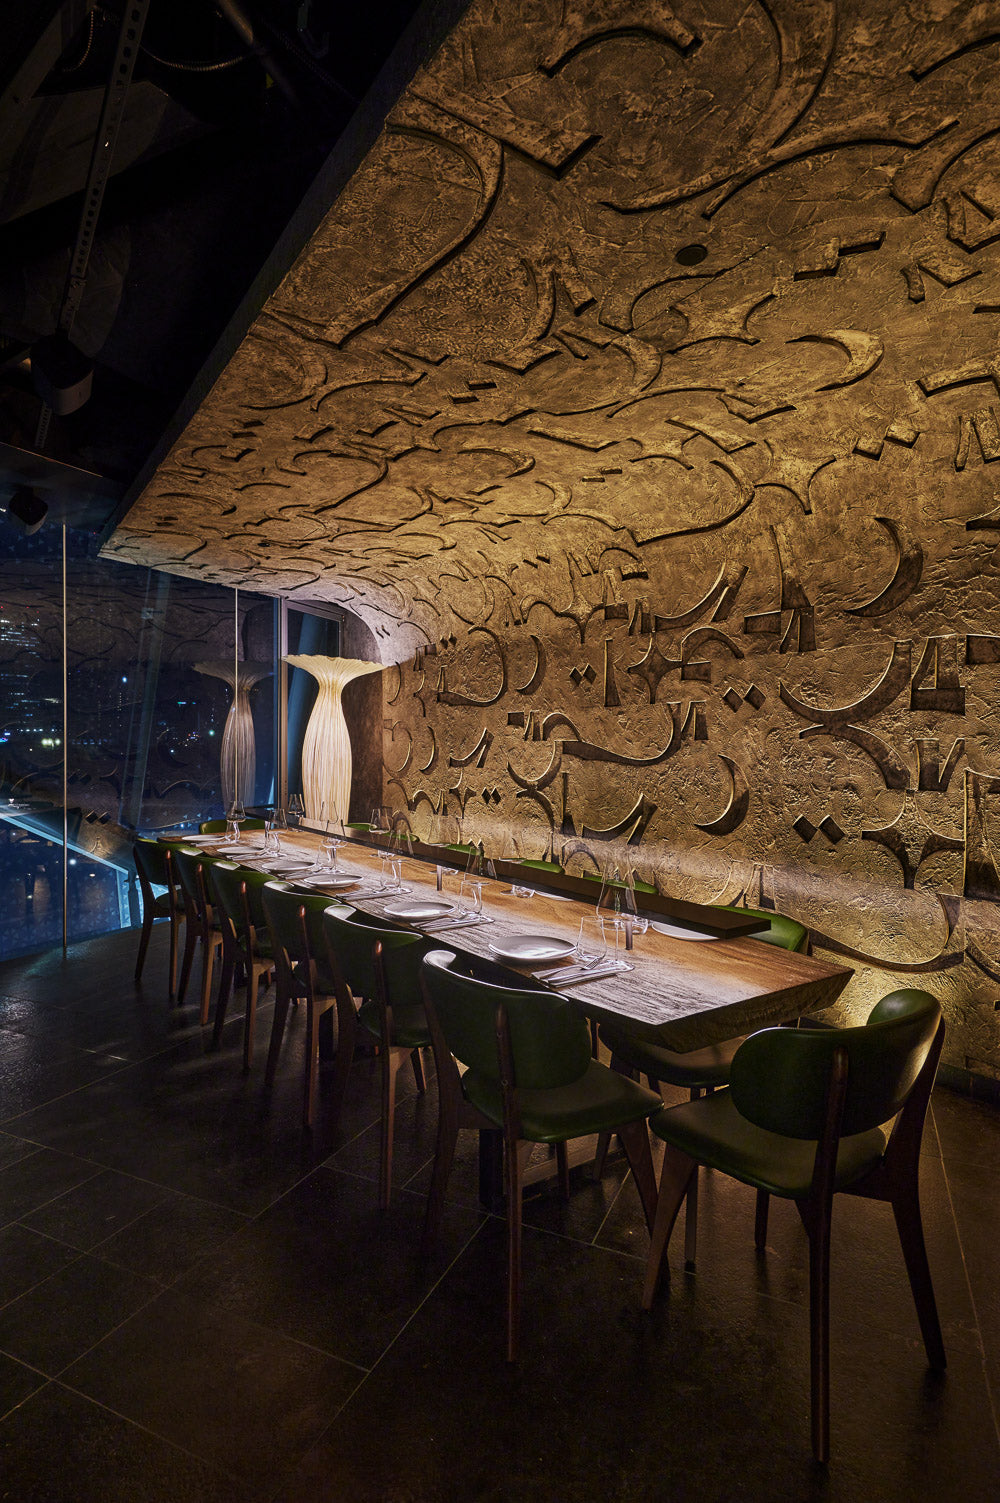 Private Dining Room at Aniba restaurant, Singapore